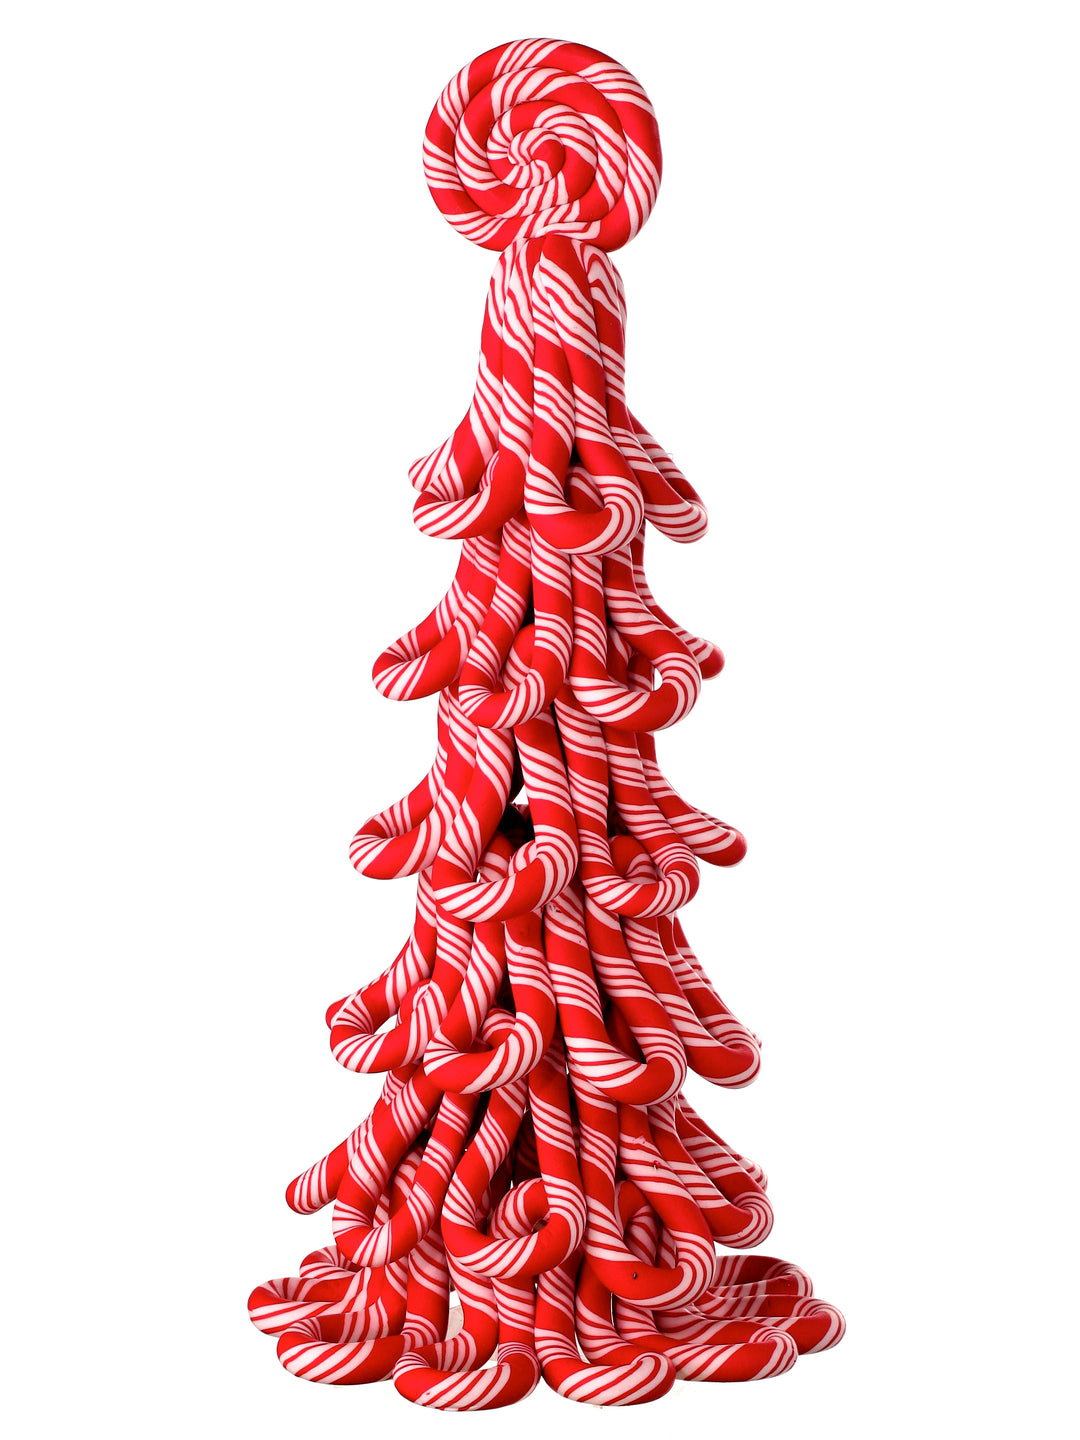 Regency 13" Claydough Peppermint Candy Tree in Red/White